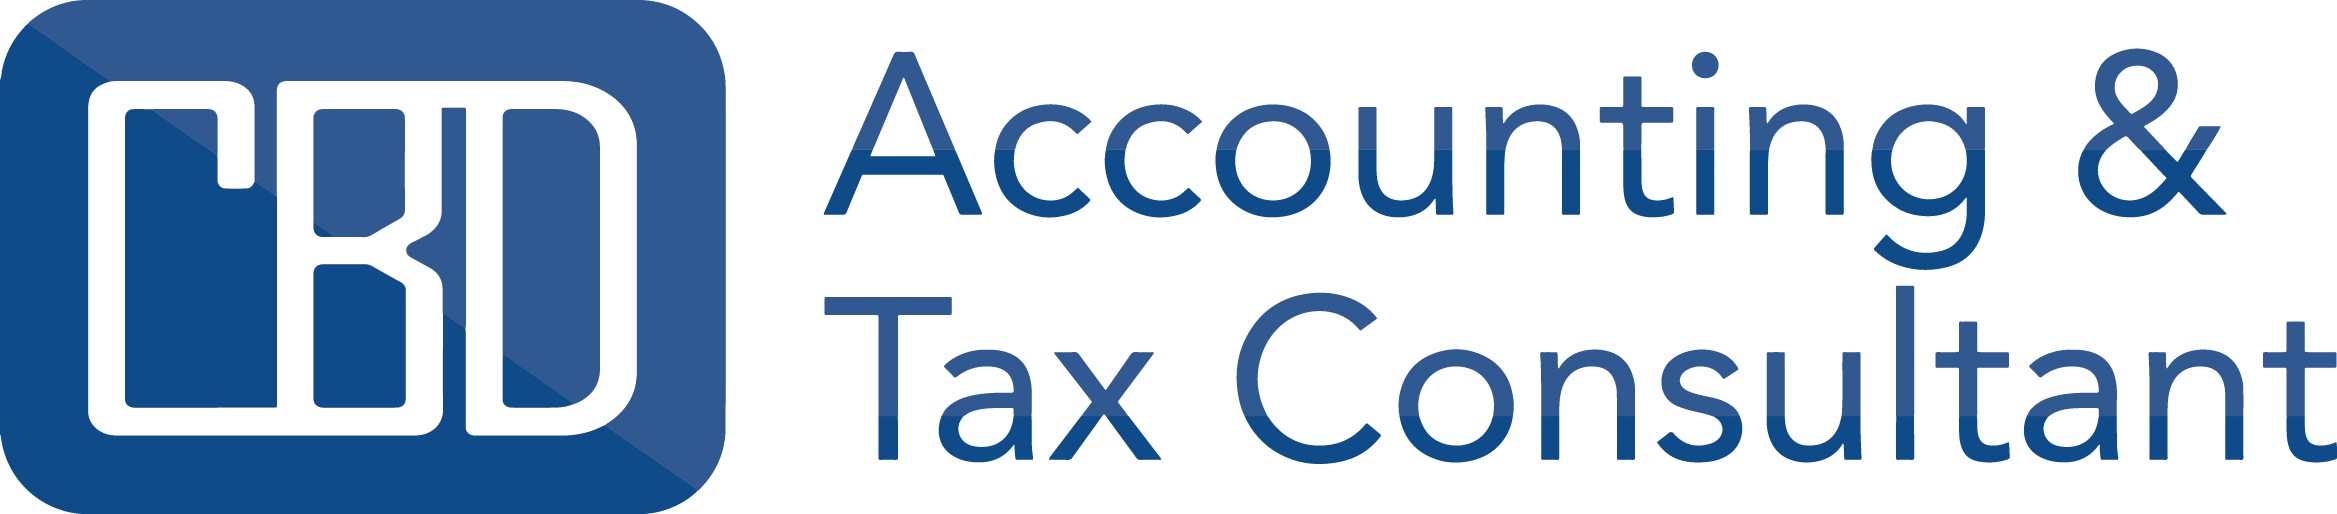 CBD Accounting and TAX Consultant Logo